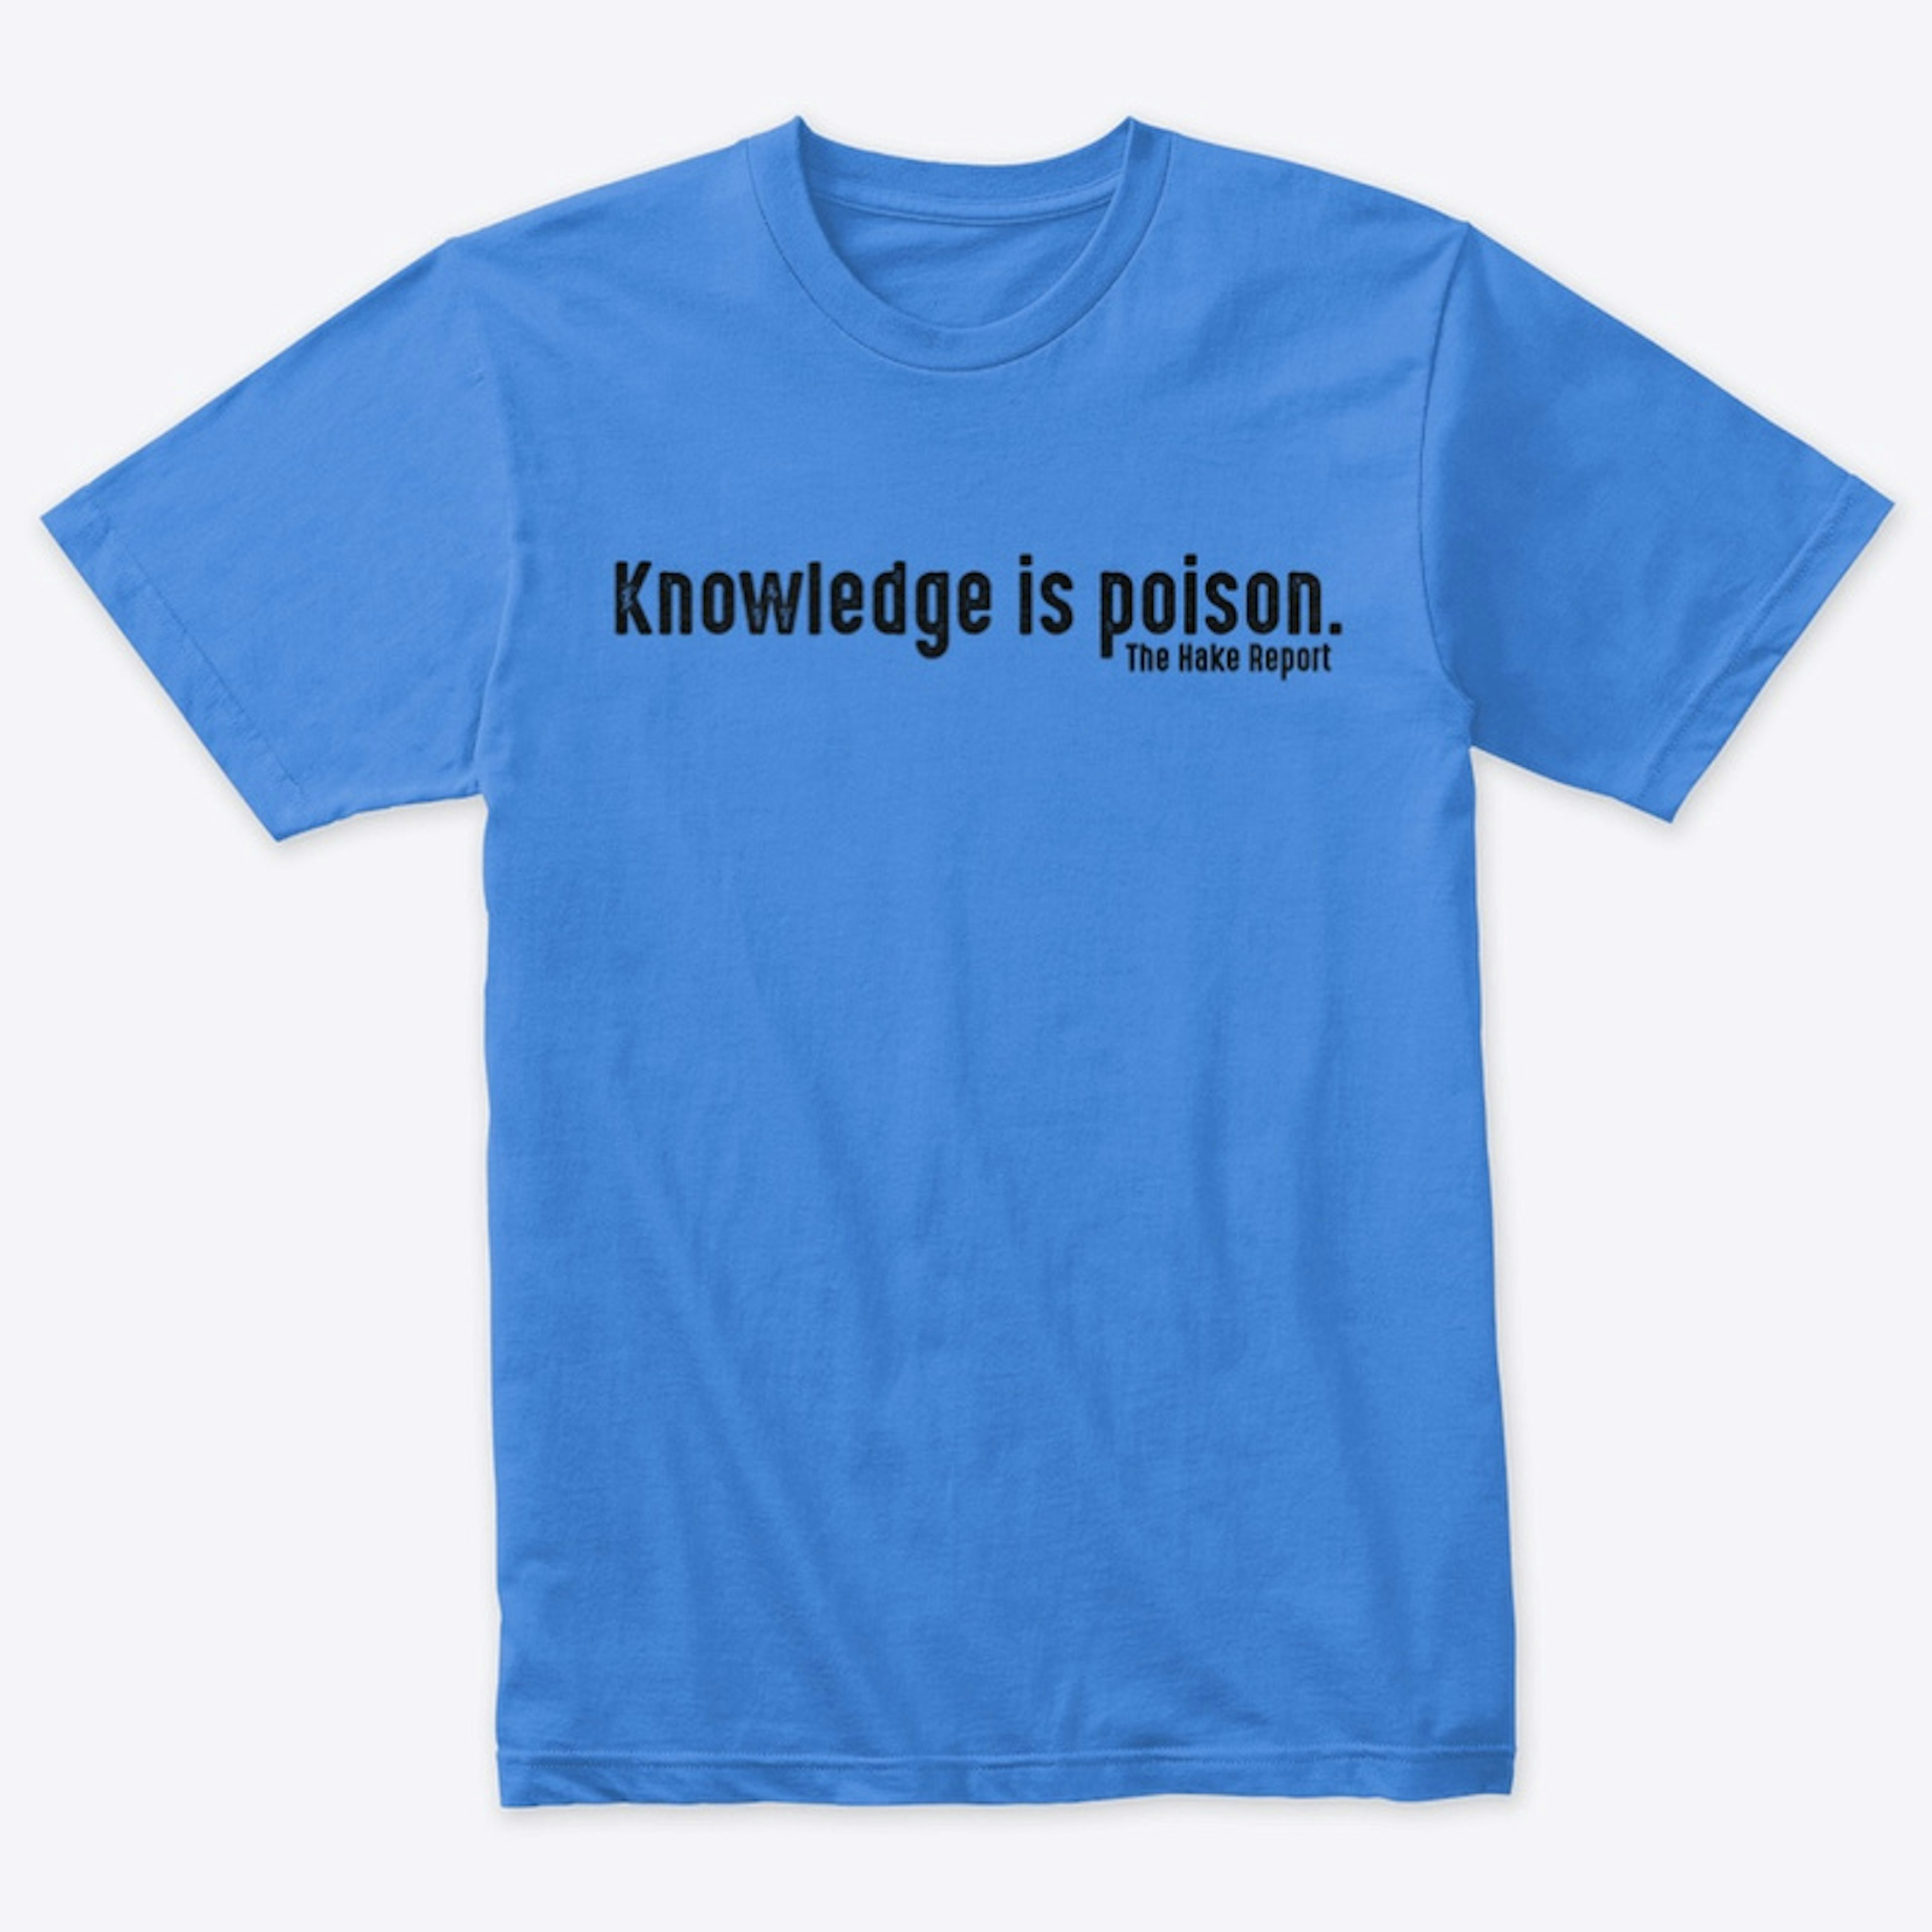 Knowledge is poison (black ink)